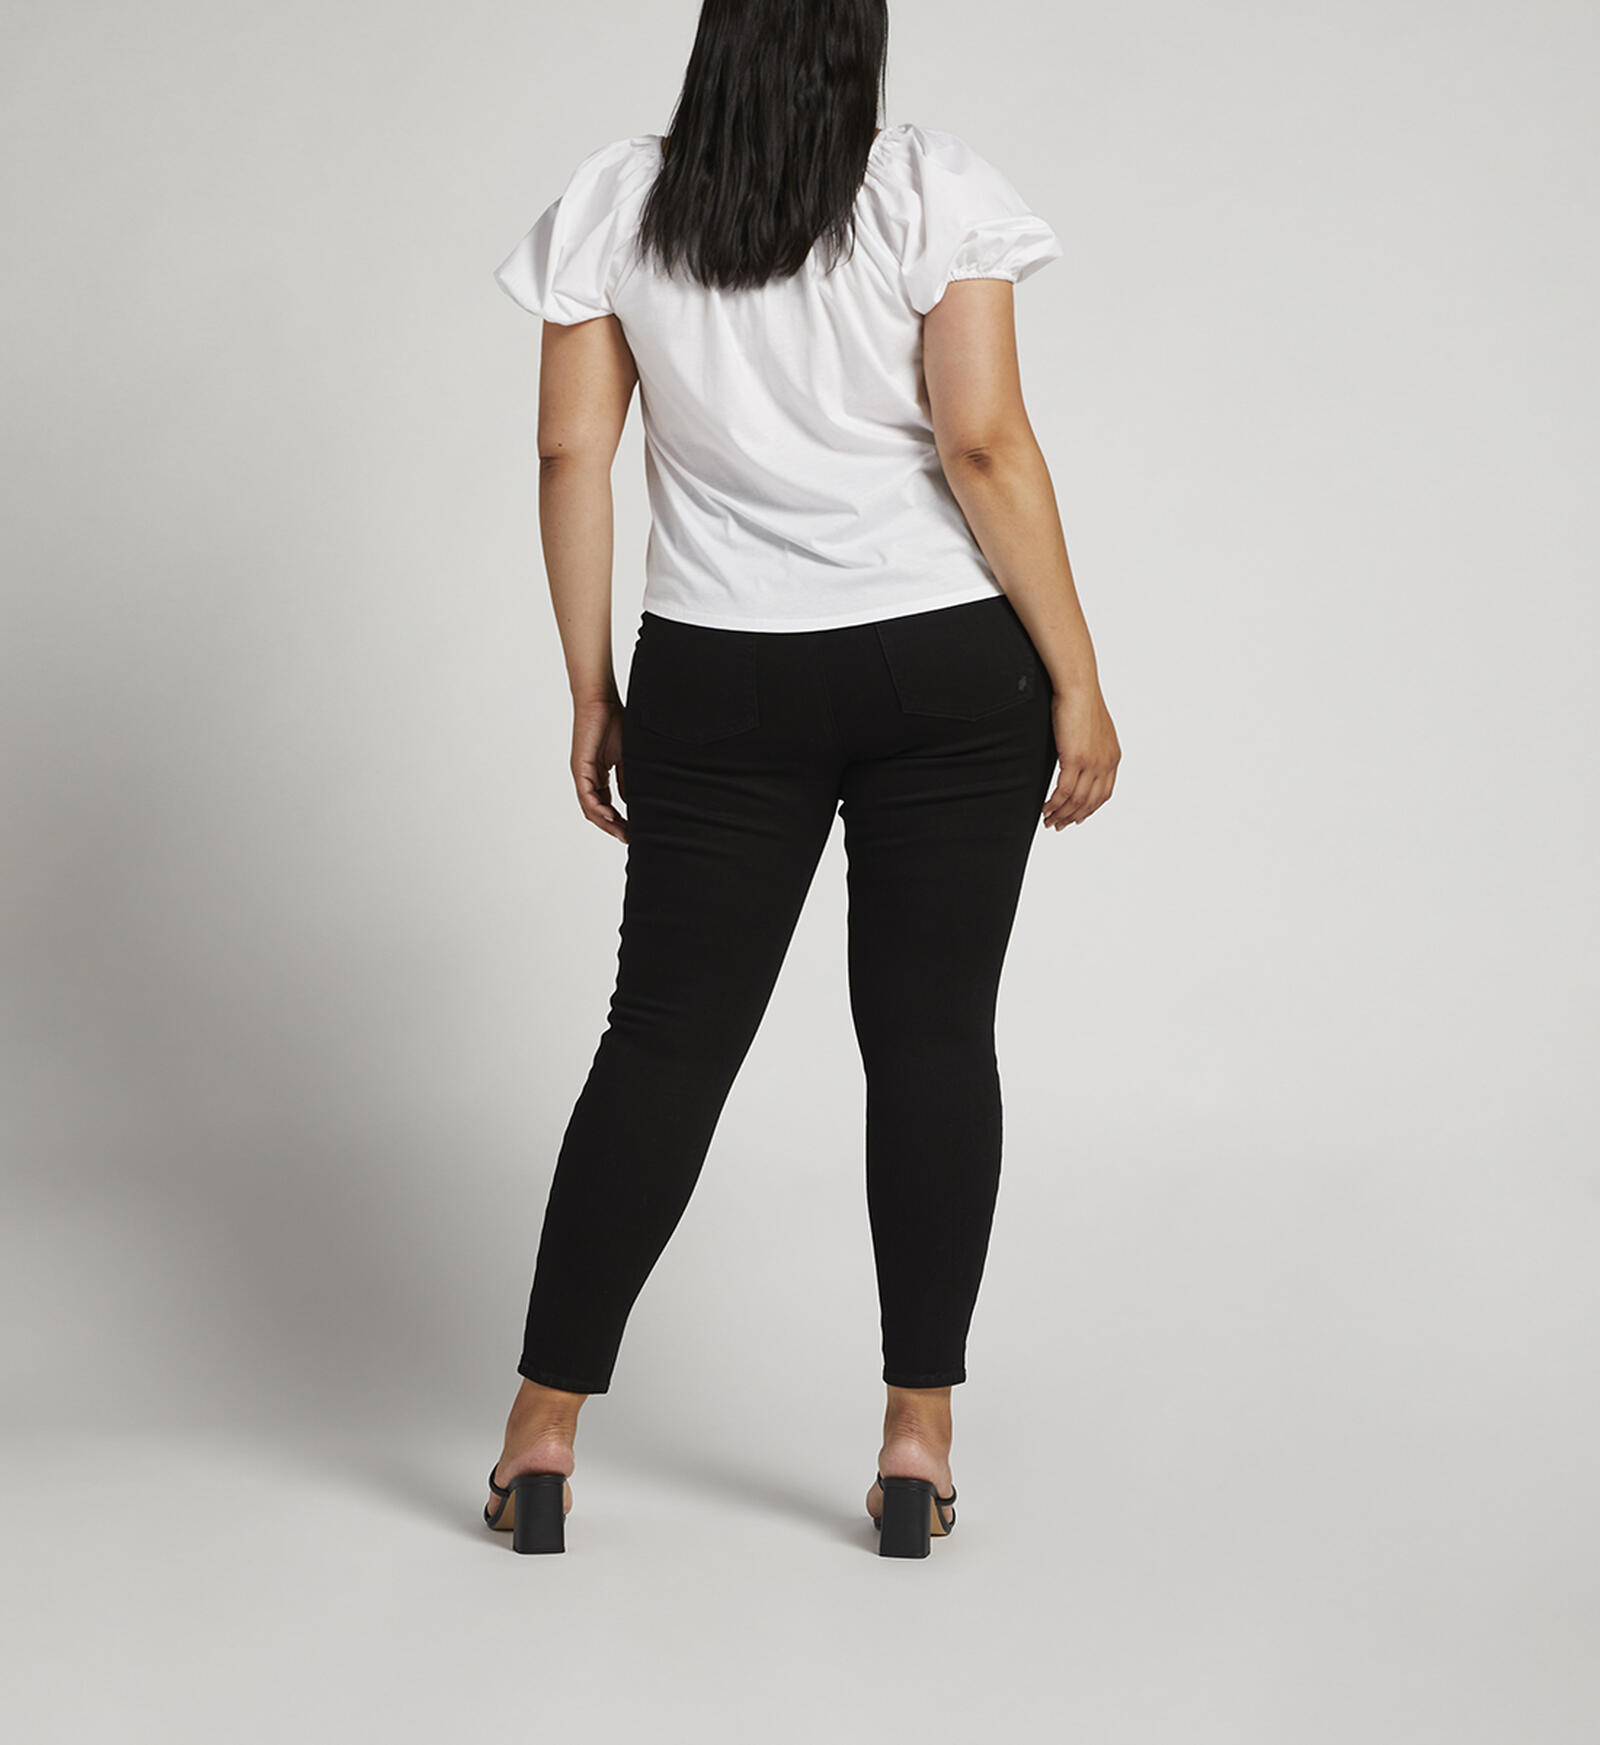 Infinite Fit High Rise Skinny Jeans Plus Size for 68.00 | Silver Jeans US New